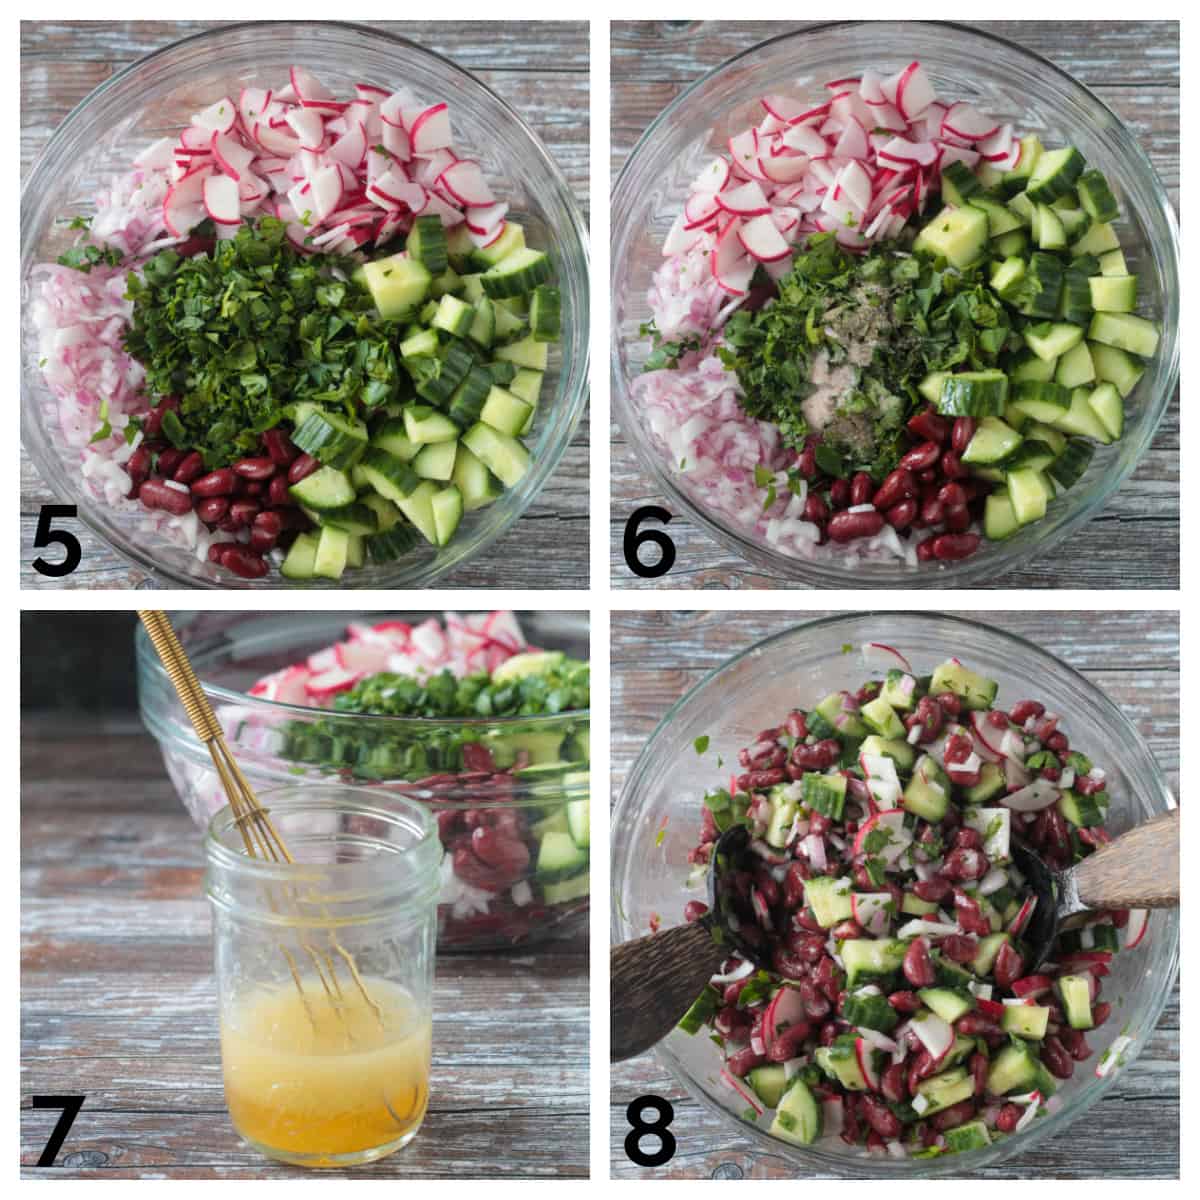 4 photo collage of adding parsley, salt, pepper & dressing to salad and tossing it.